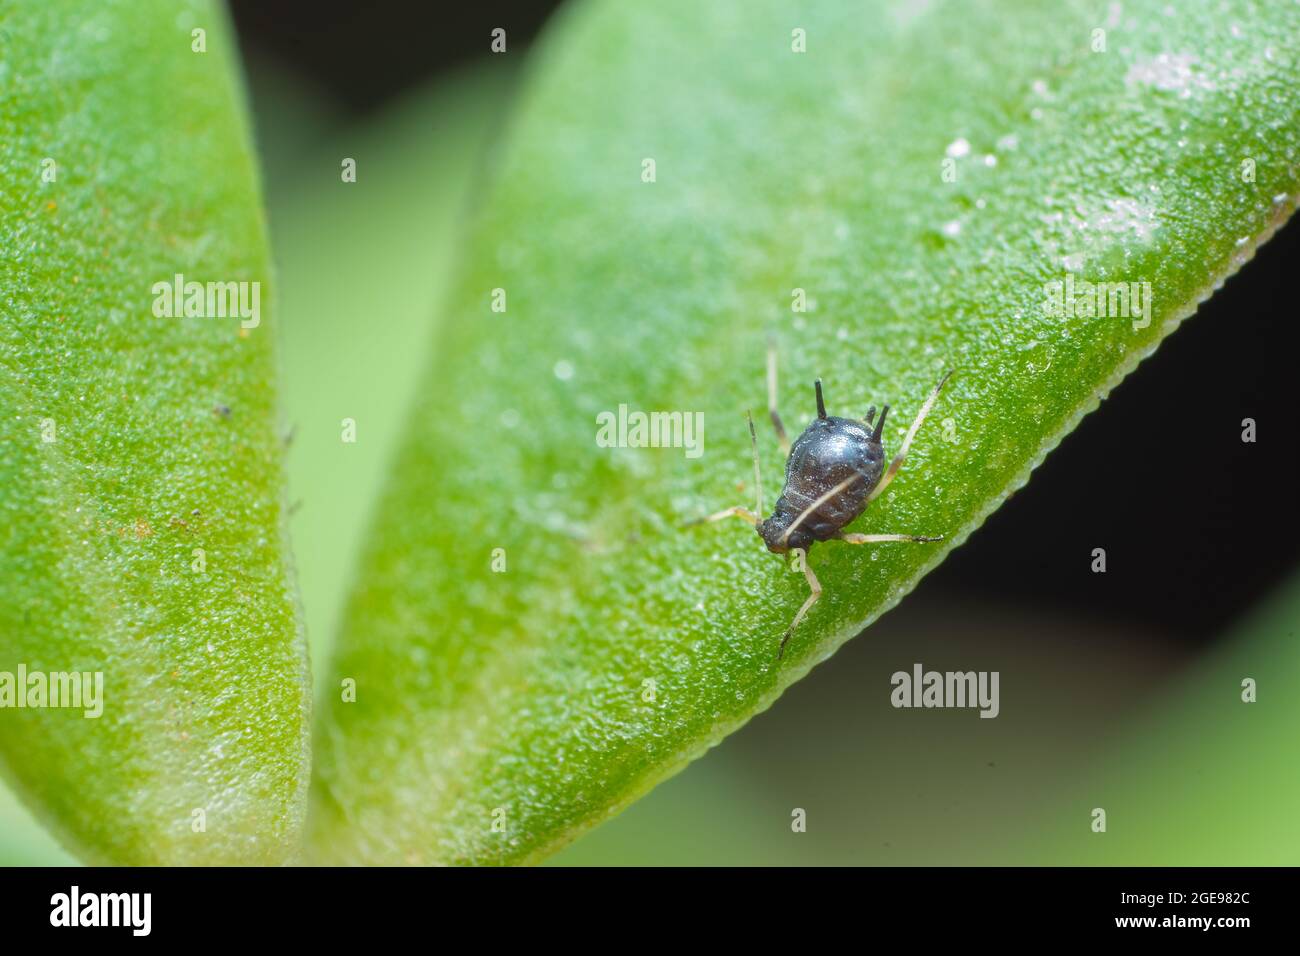 One black colored aphid on the leaf. These are the insect pest which suck the cell sap and damage the agriculture crops. Used selective focus. Stock Photo